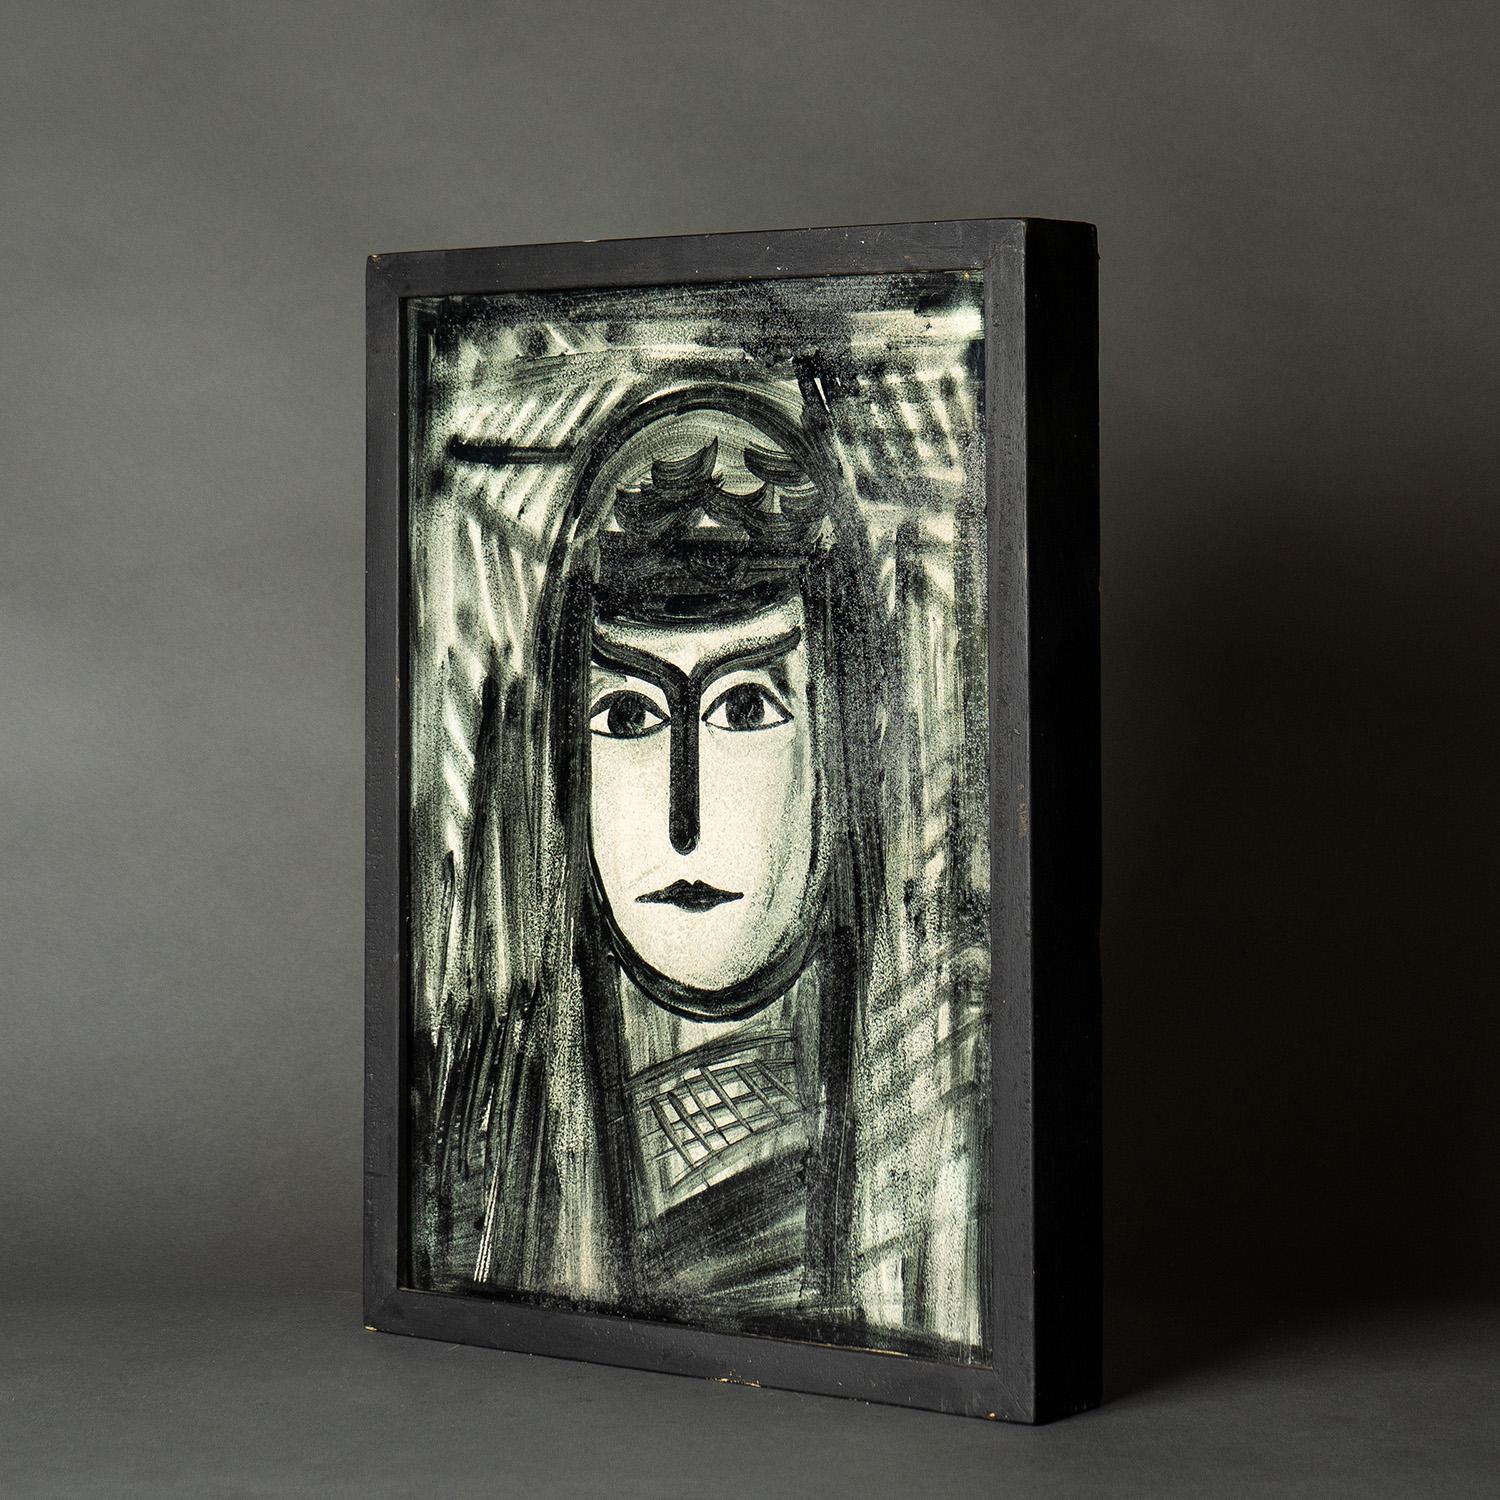 Vintage Monochrome Portrait Painting

Dating from the 1950s-1960s period and painted in the Fauvist style.

Freely and quickly painted confidently with monochrome glaze on thick ceramic tile.

They are unsigned but definitely by an accomplished